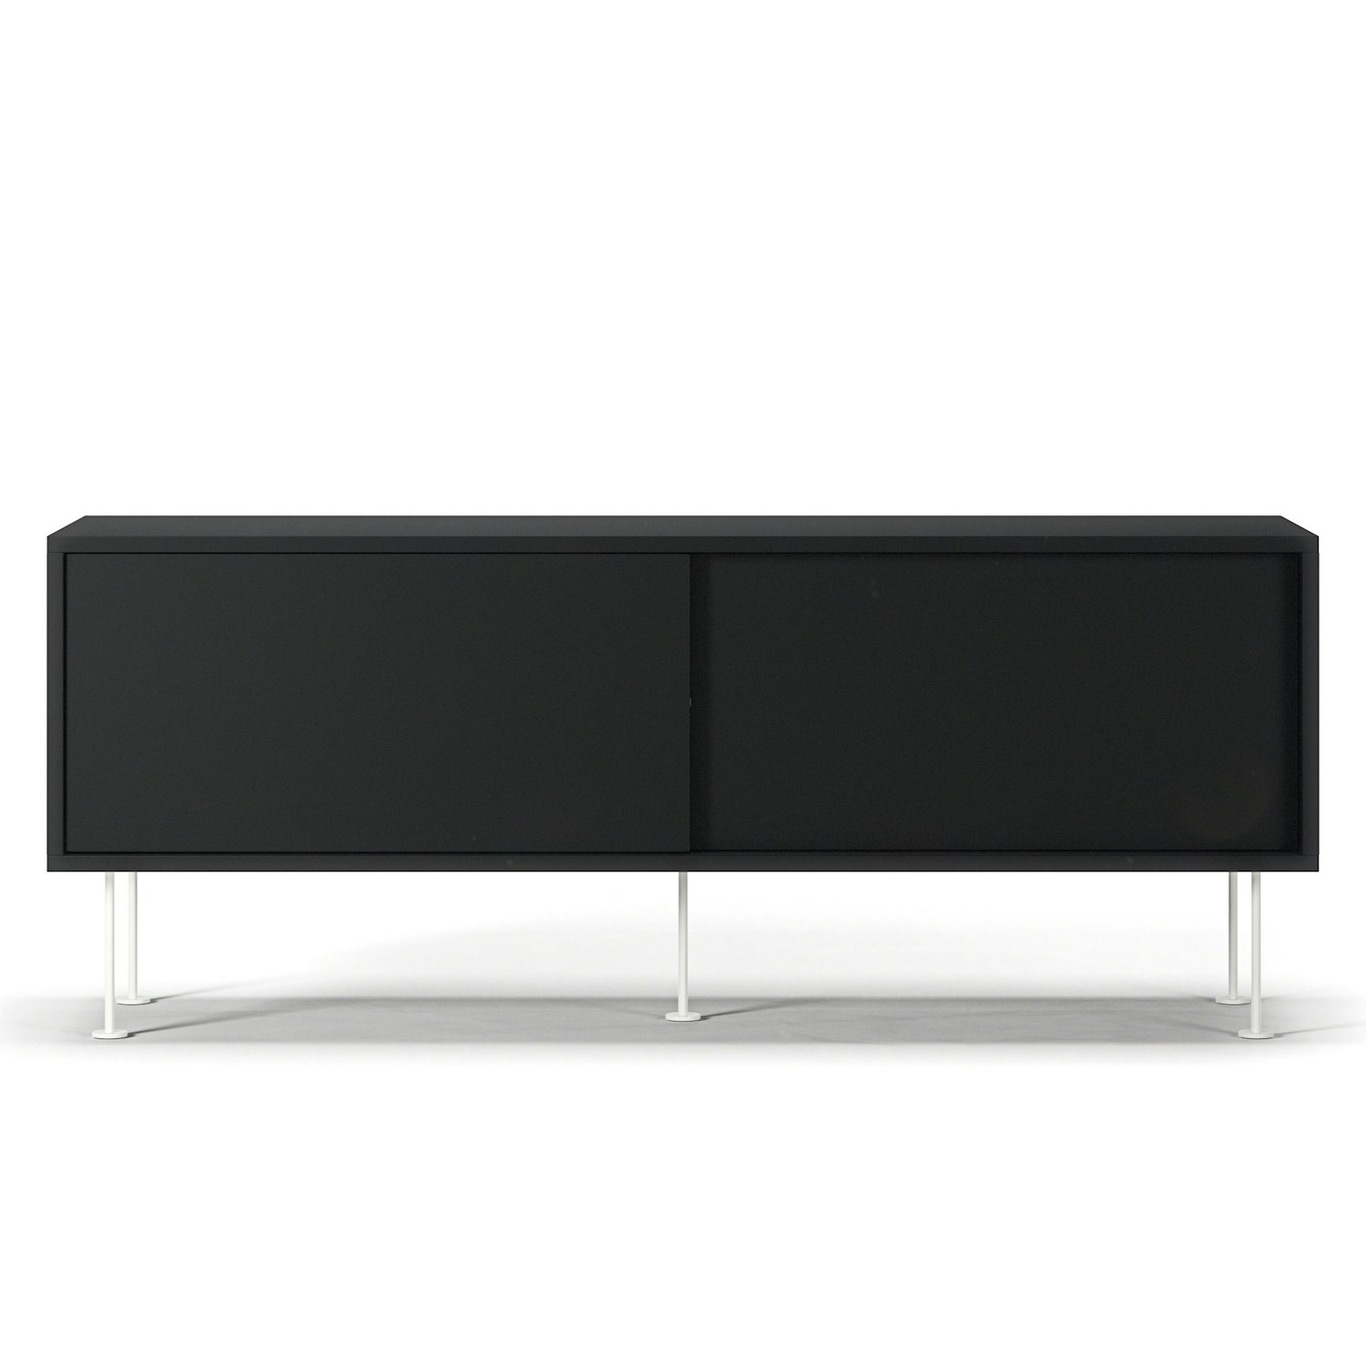 Vogue Media Bench With Legs 136 cm, Anthracite / White